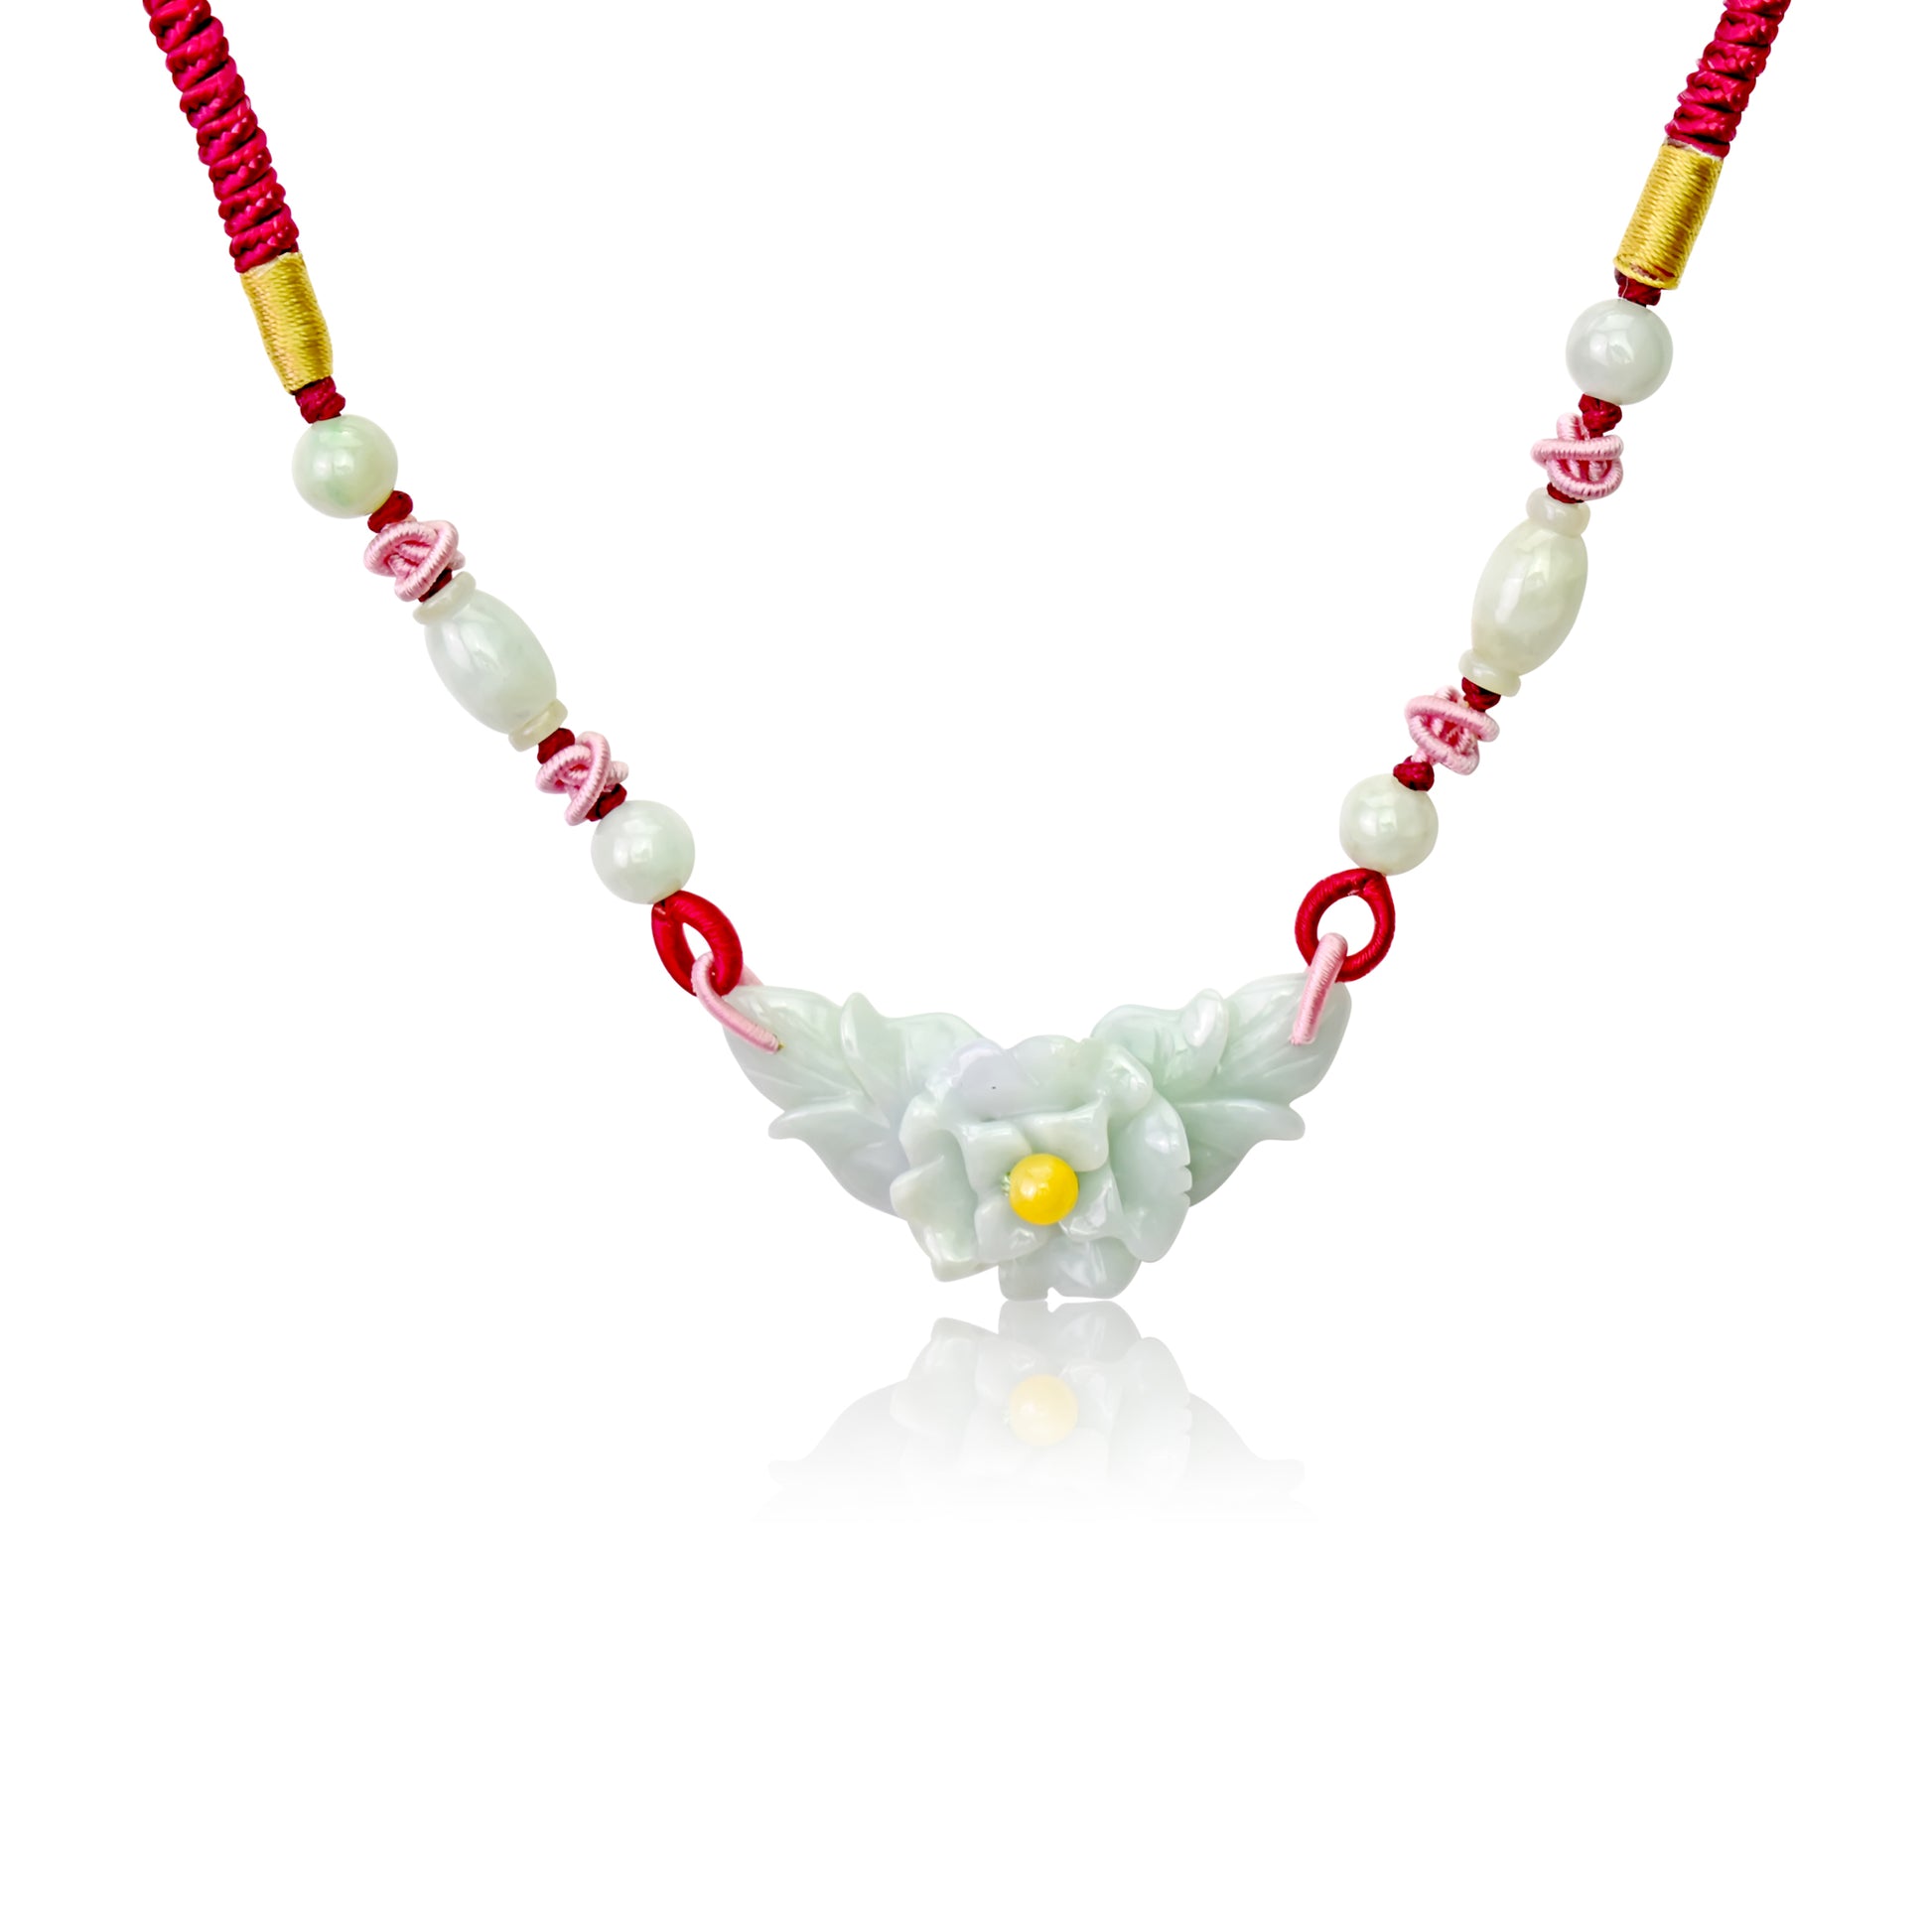 Discover Your True Beauty with a Fortune Flower Handmade Jade Necklace with Maroon Cord